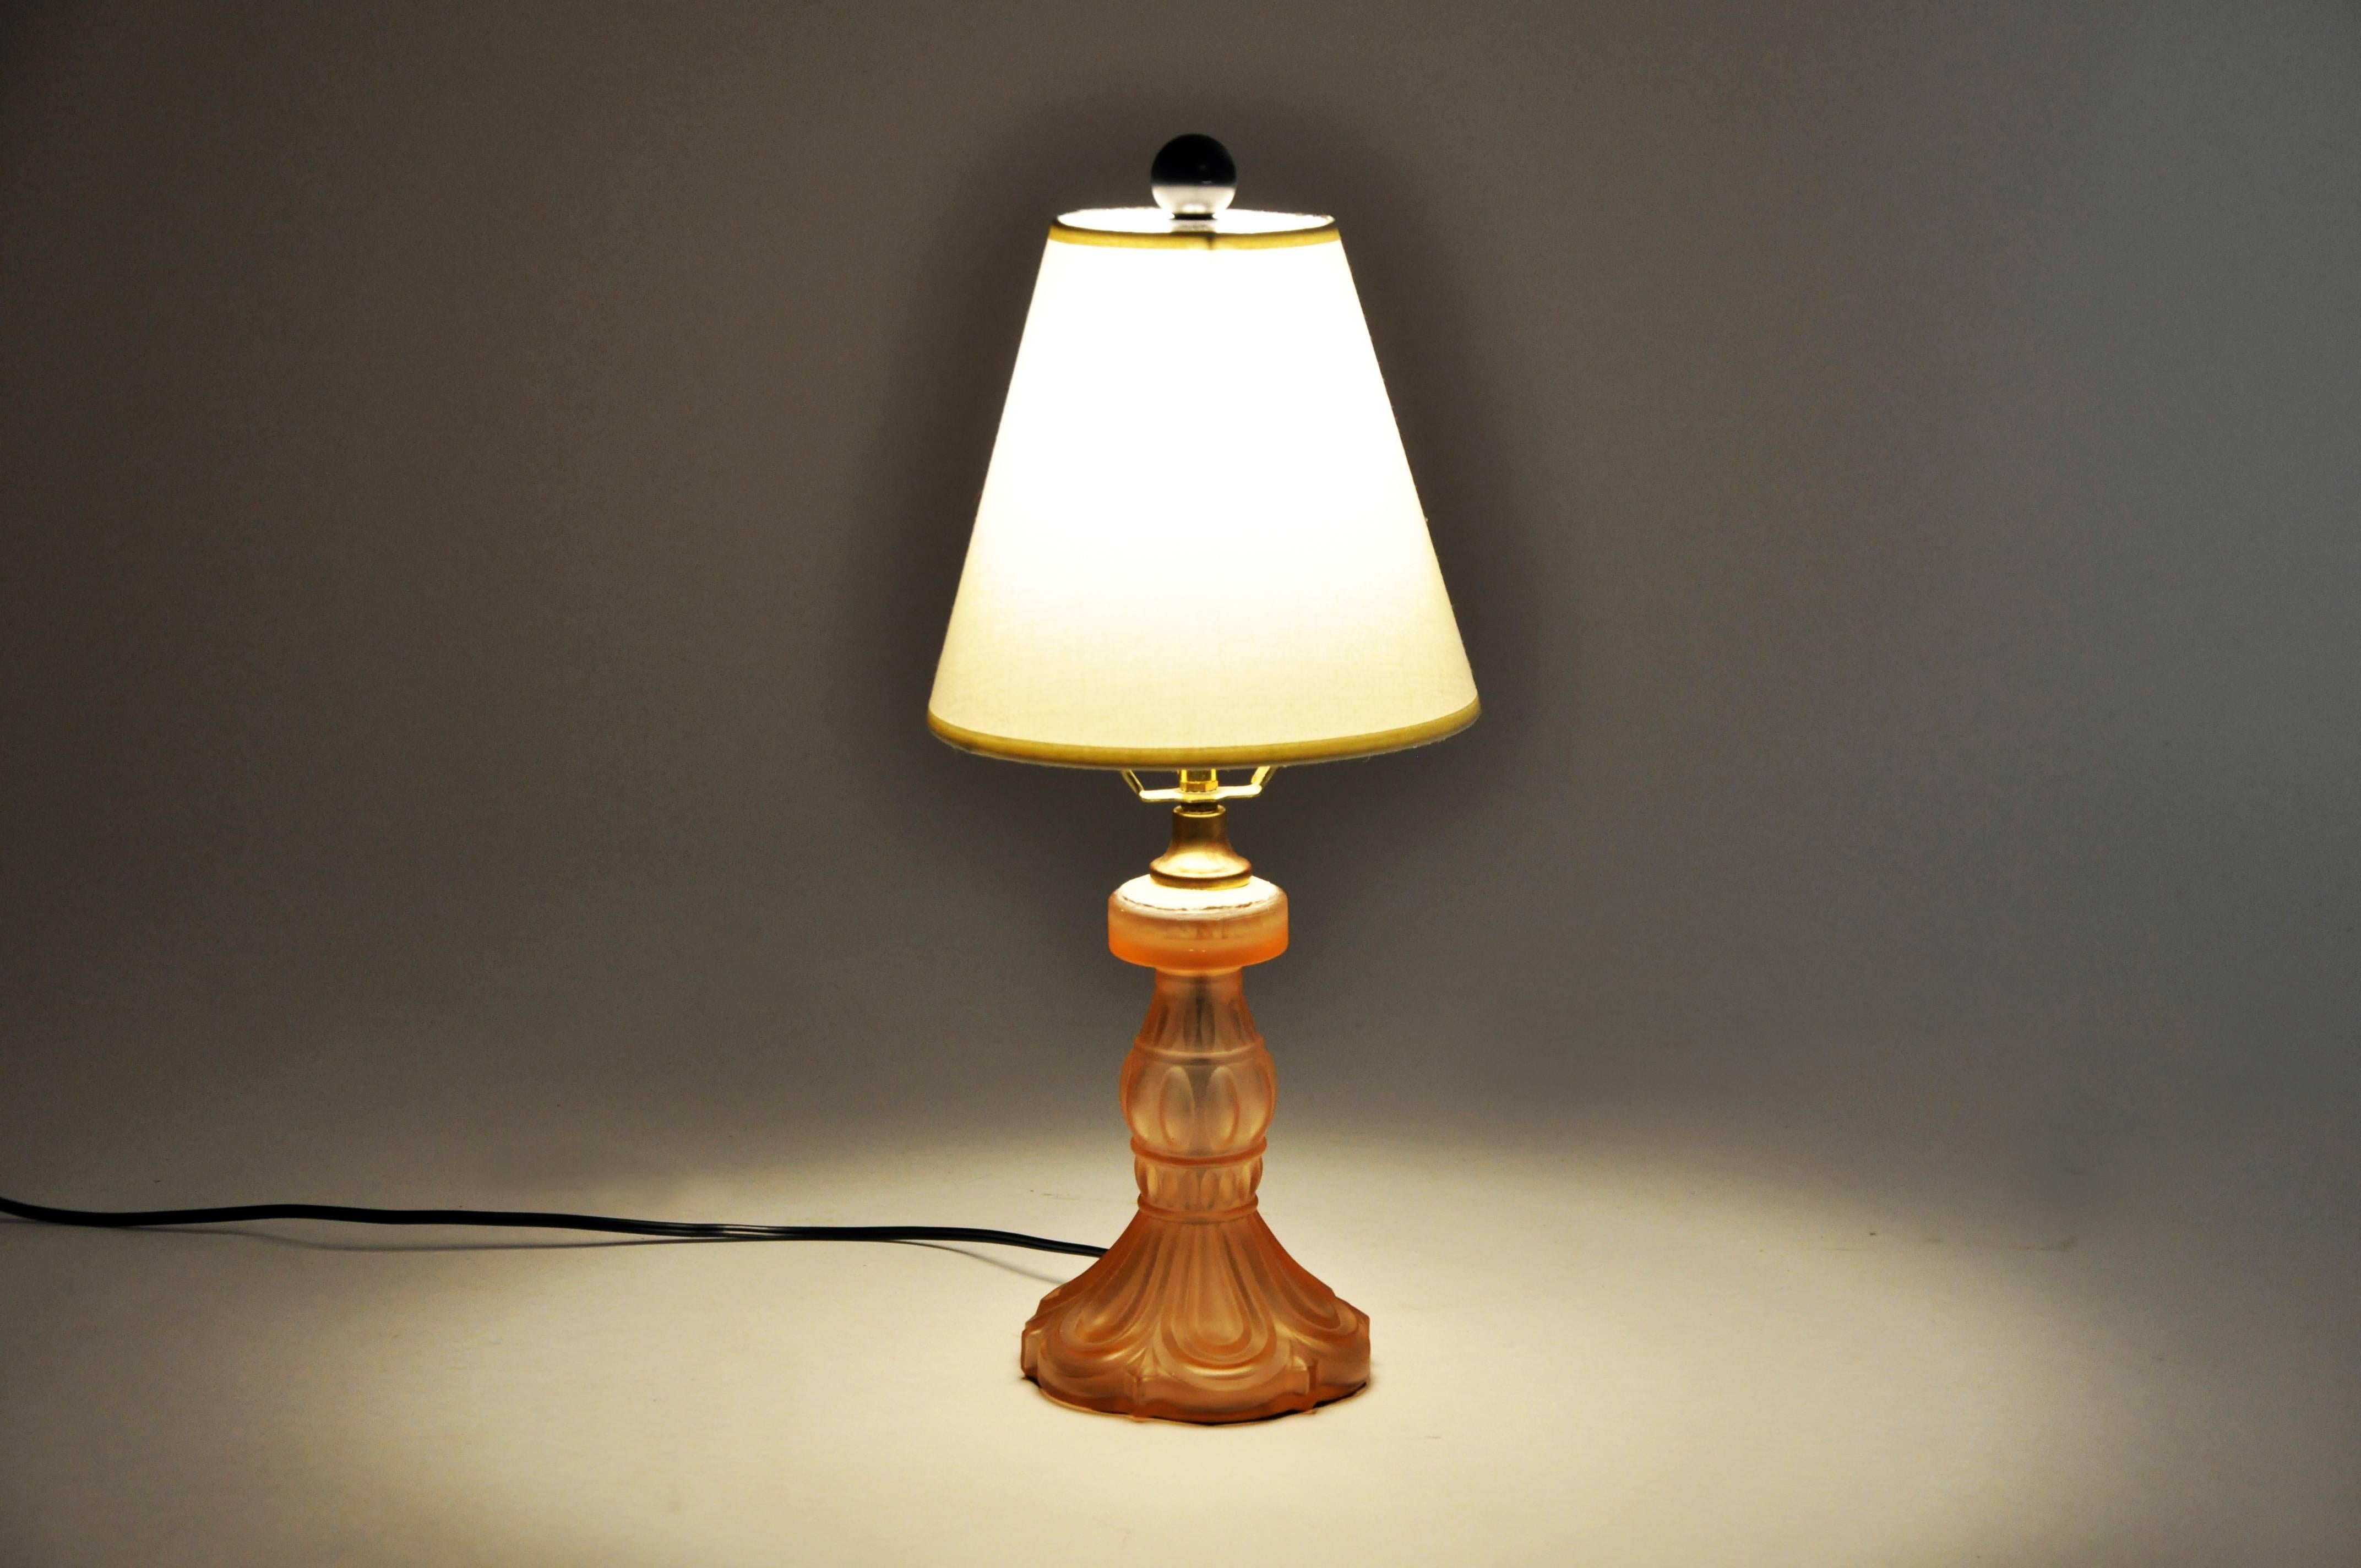 This moulded and frosted glass table lamp is from Italy, circa 20th century. A nice lamp to accent a room with color and lighting.